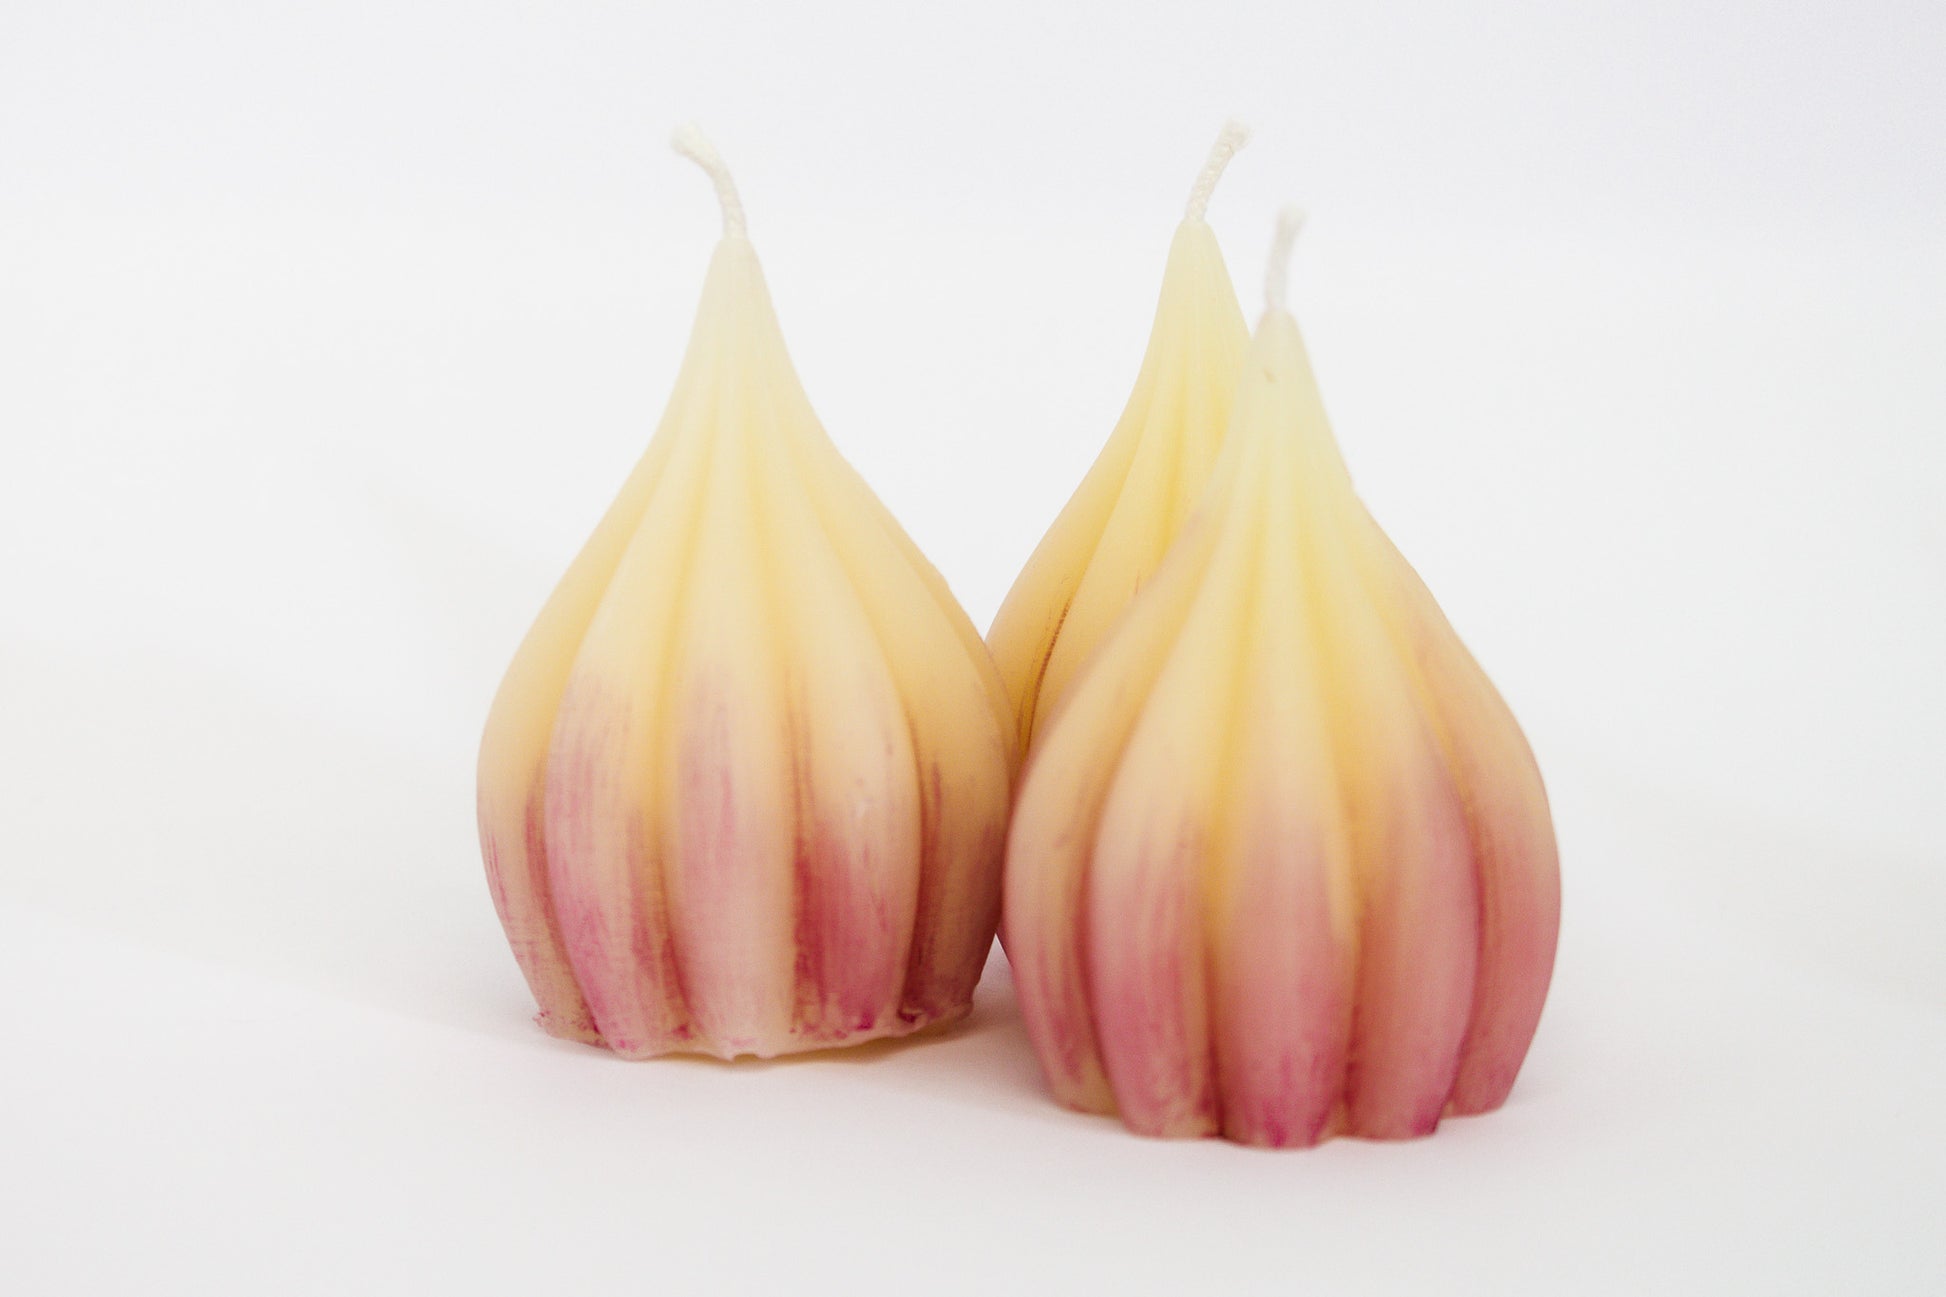 Group of three white pure beeswax garlic-shaped candles with purple tint on white background